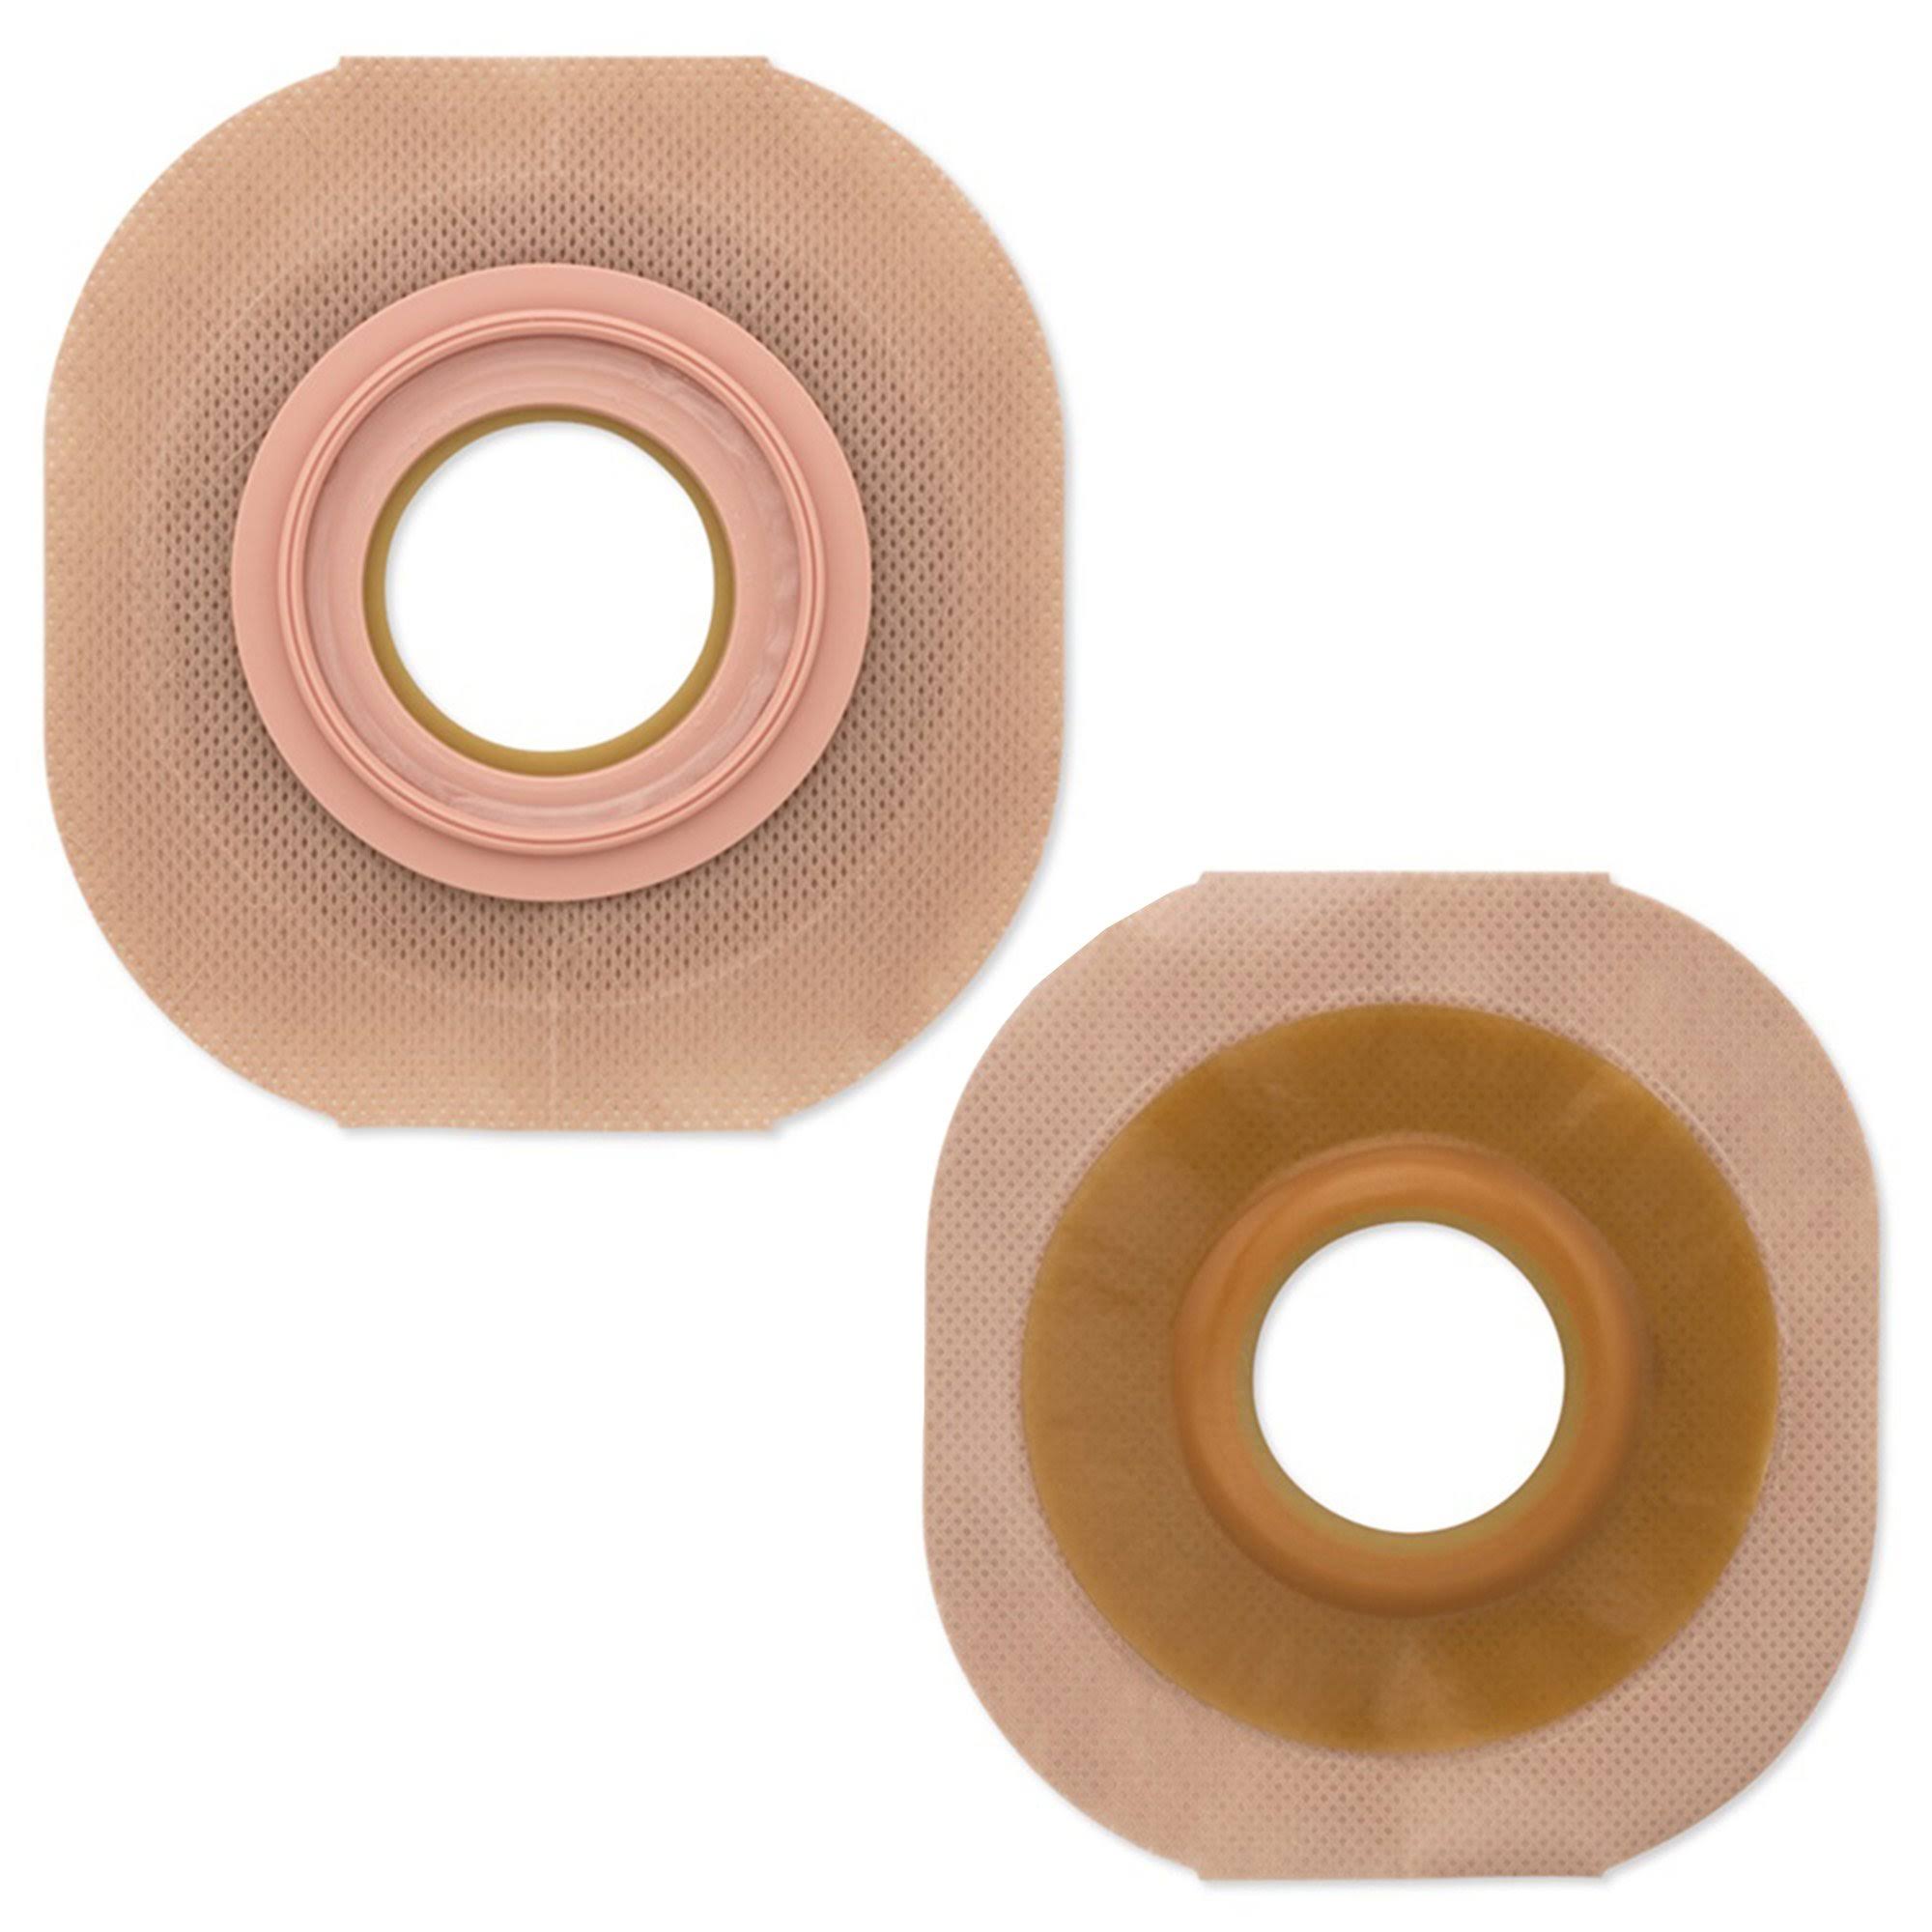 Hollister Ostomy Barrier, Count of 5 (Pack of 1)